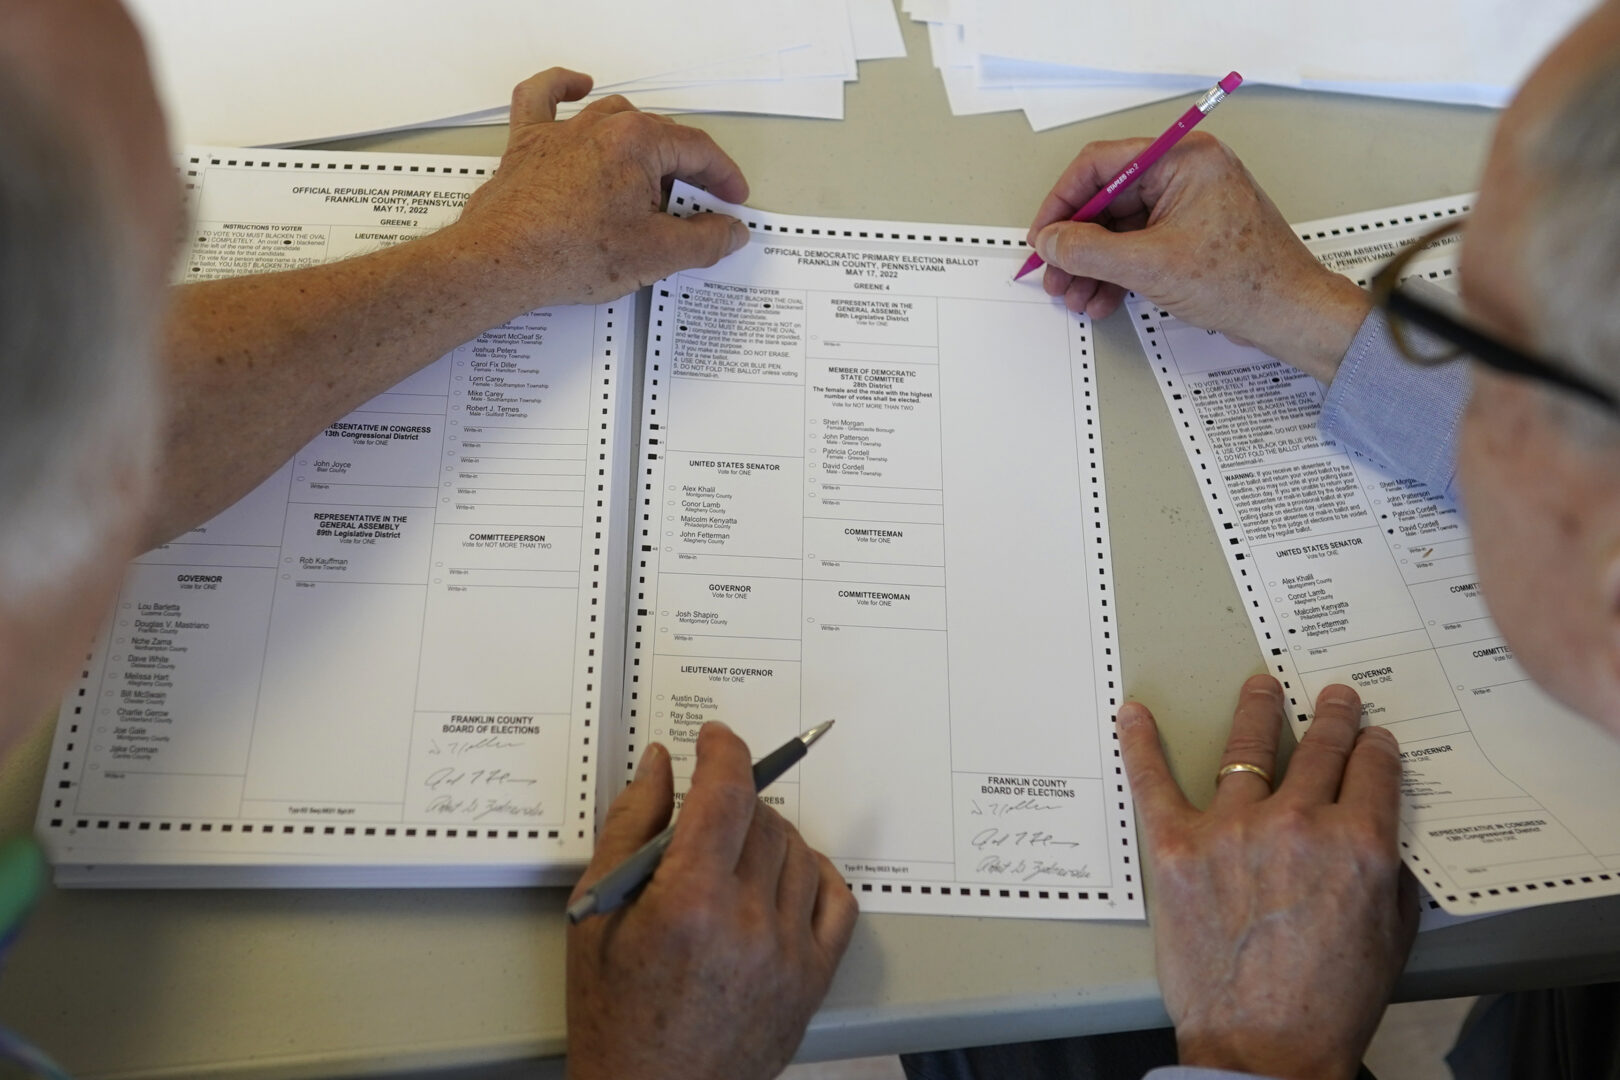 Two workers holding pencils handle a ballot